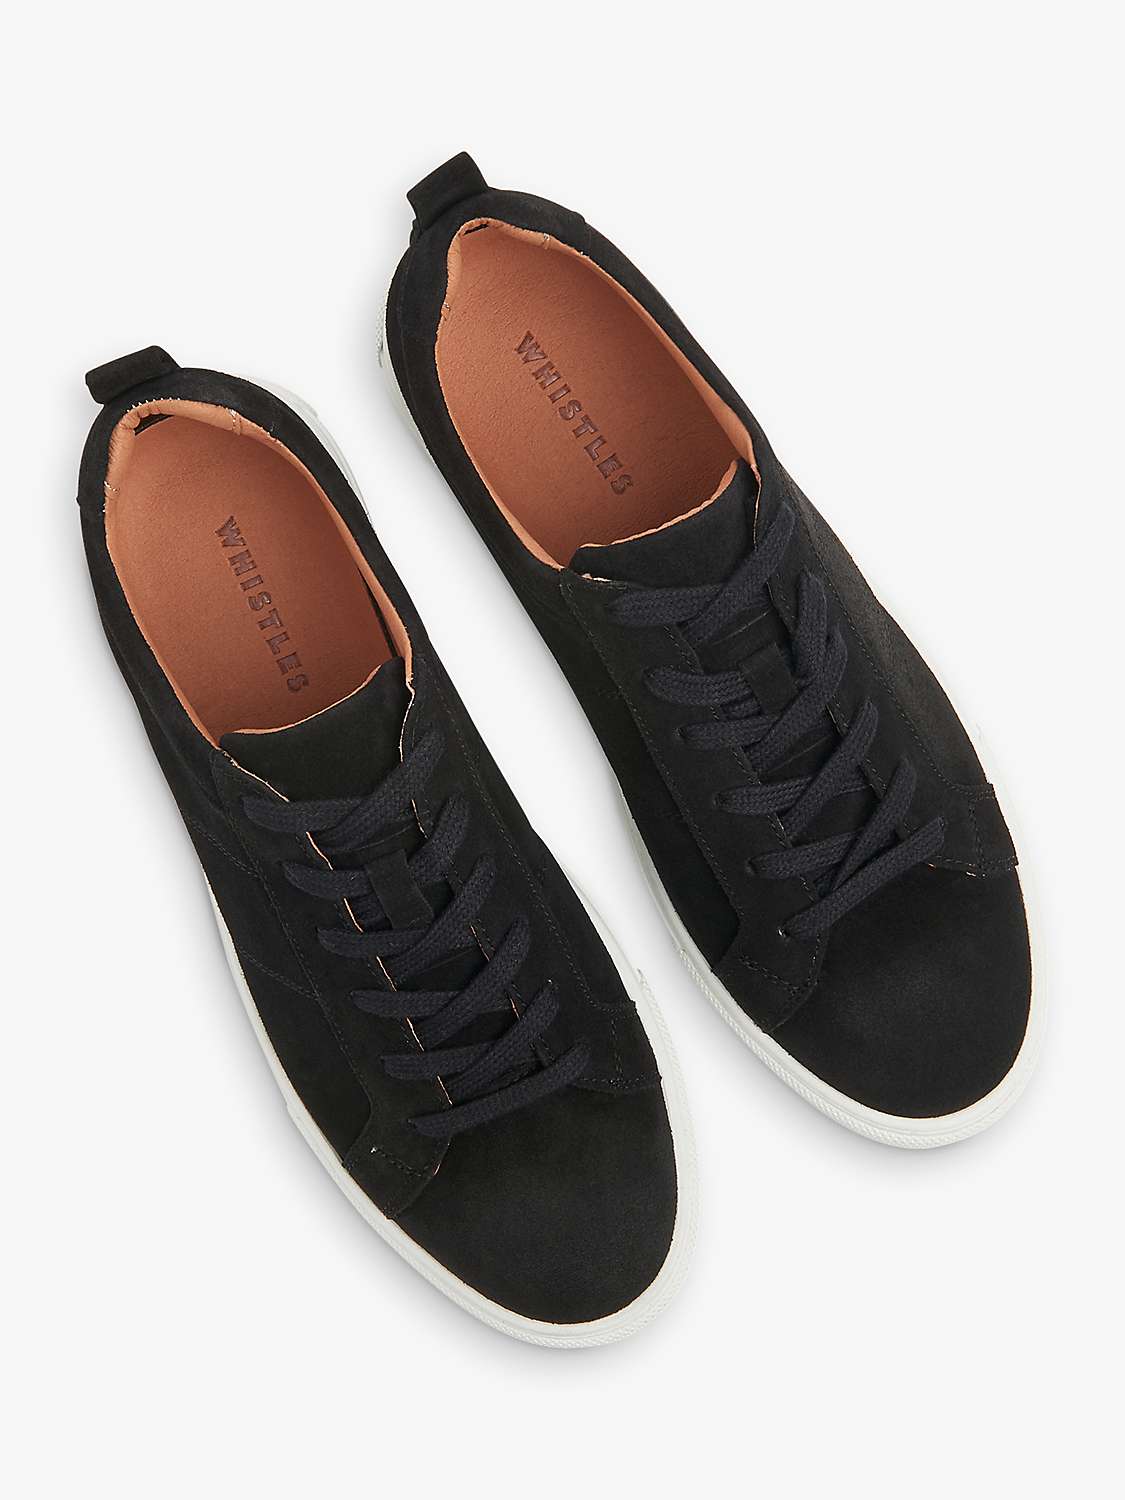 Buy Whistles Koki Lace Up Trainers Online at johnlewis.com